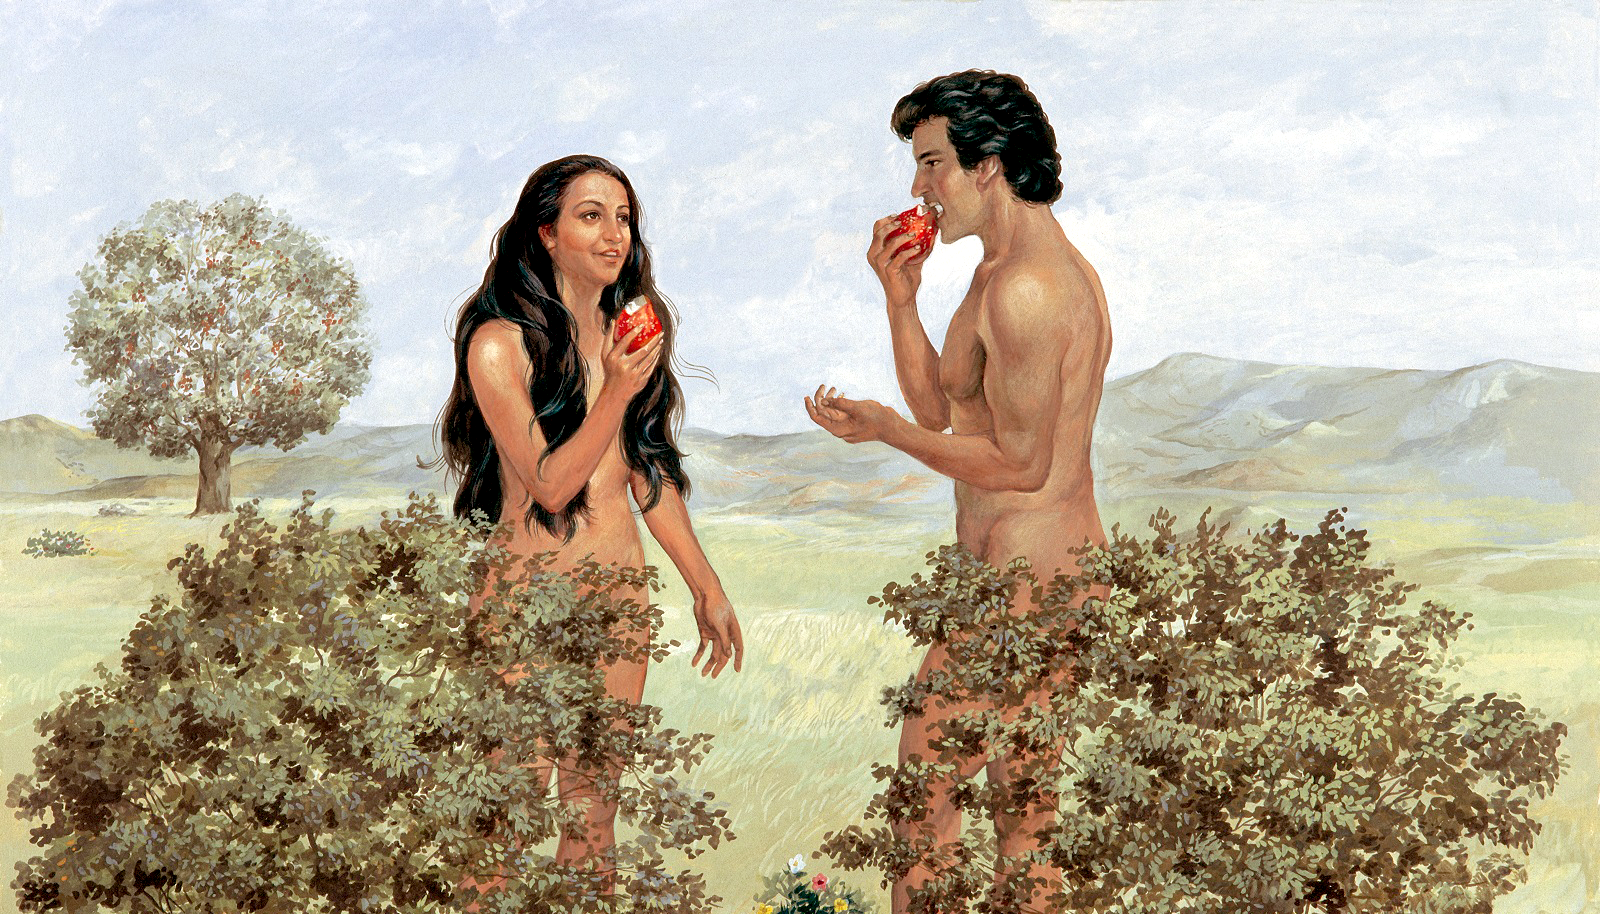 Comparing Adam and Eve to Batteries - Ethnos360.